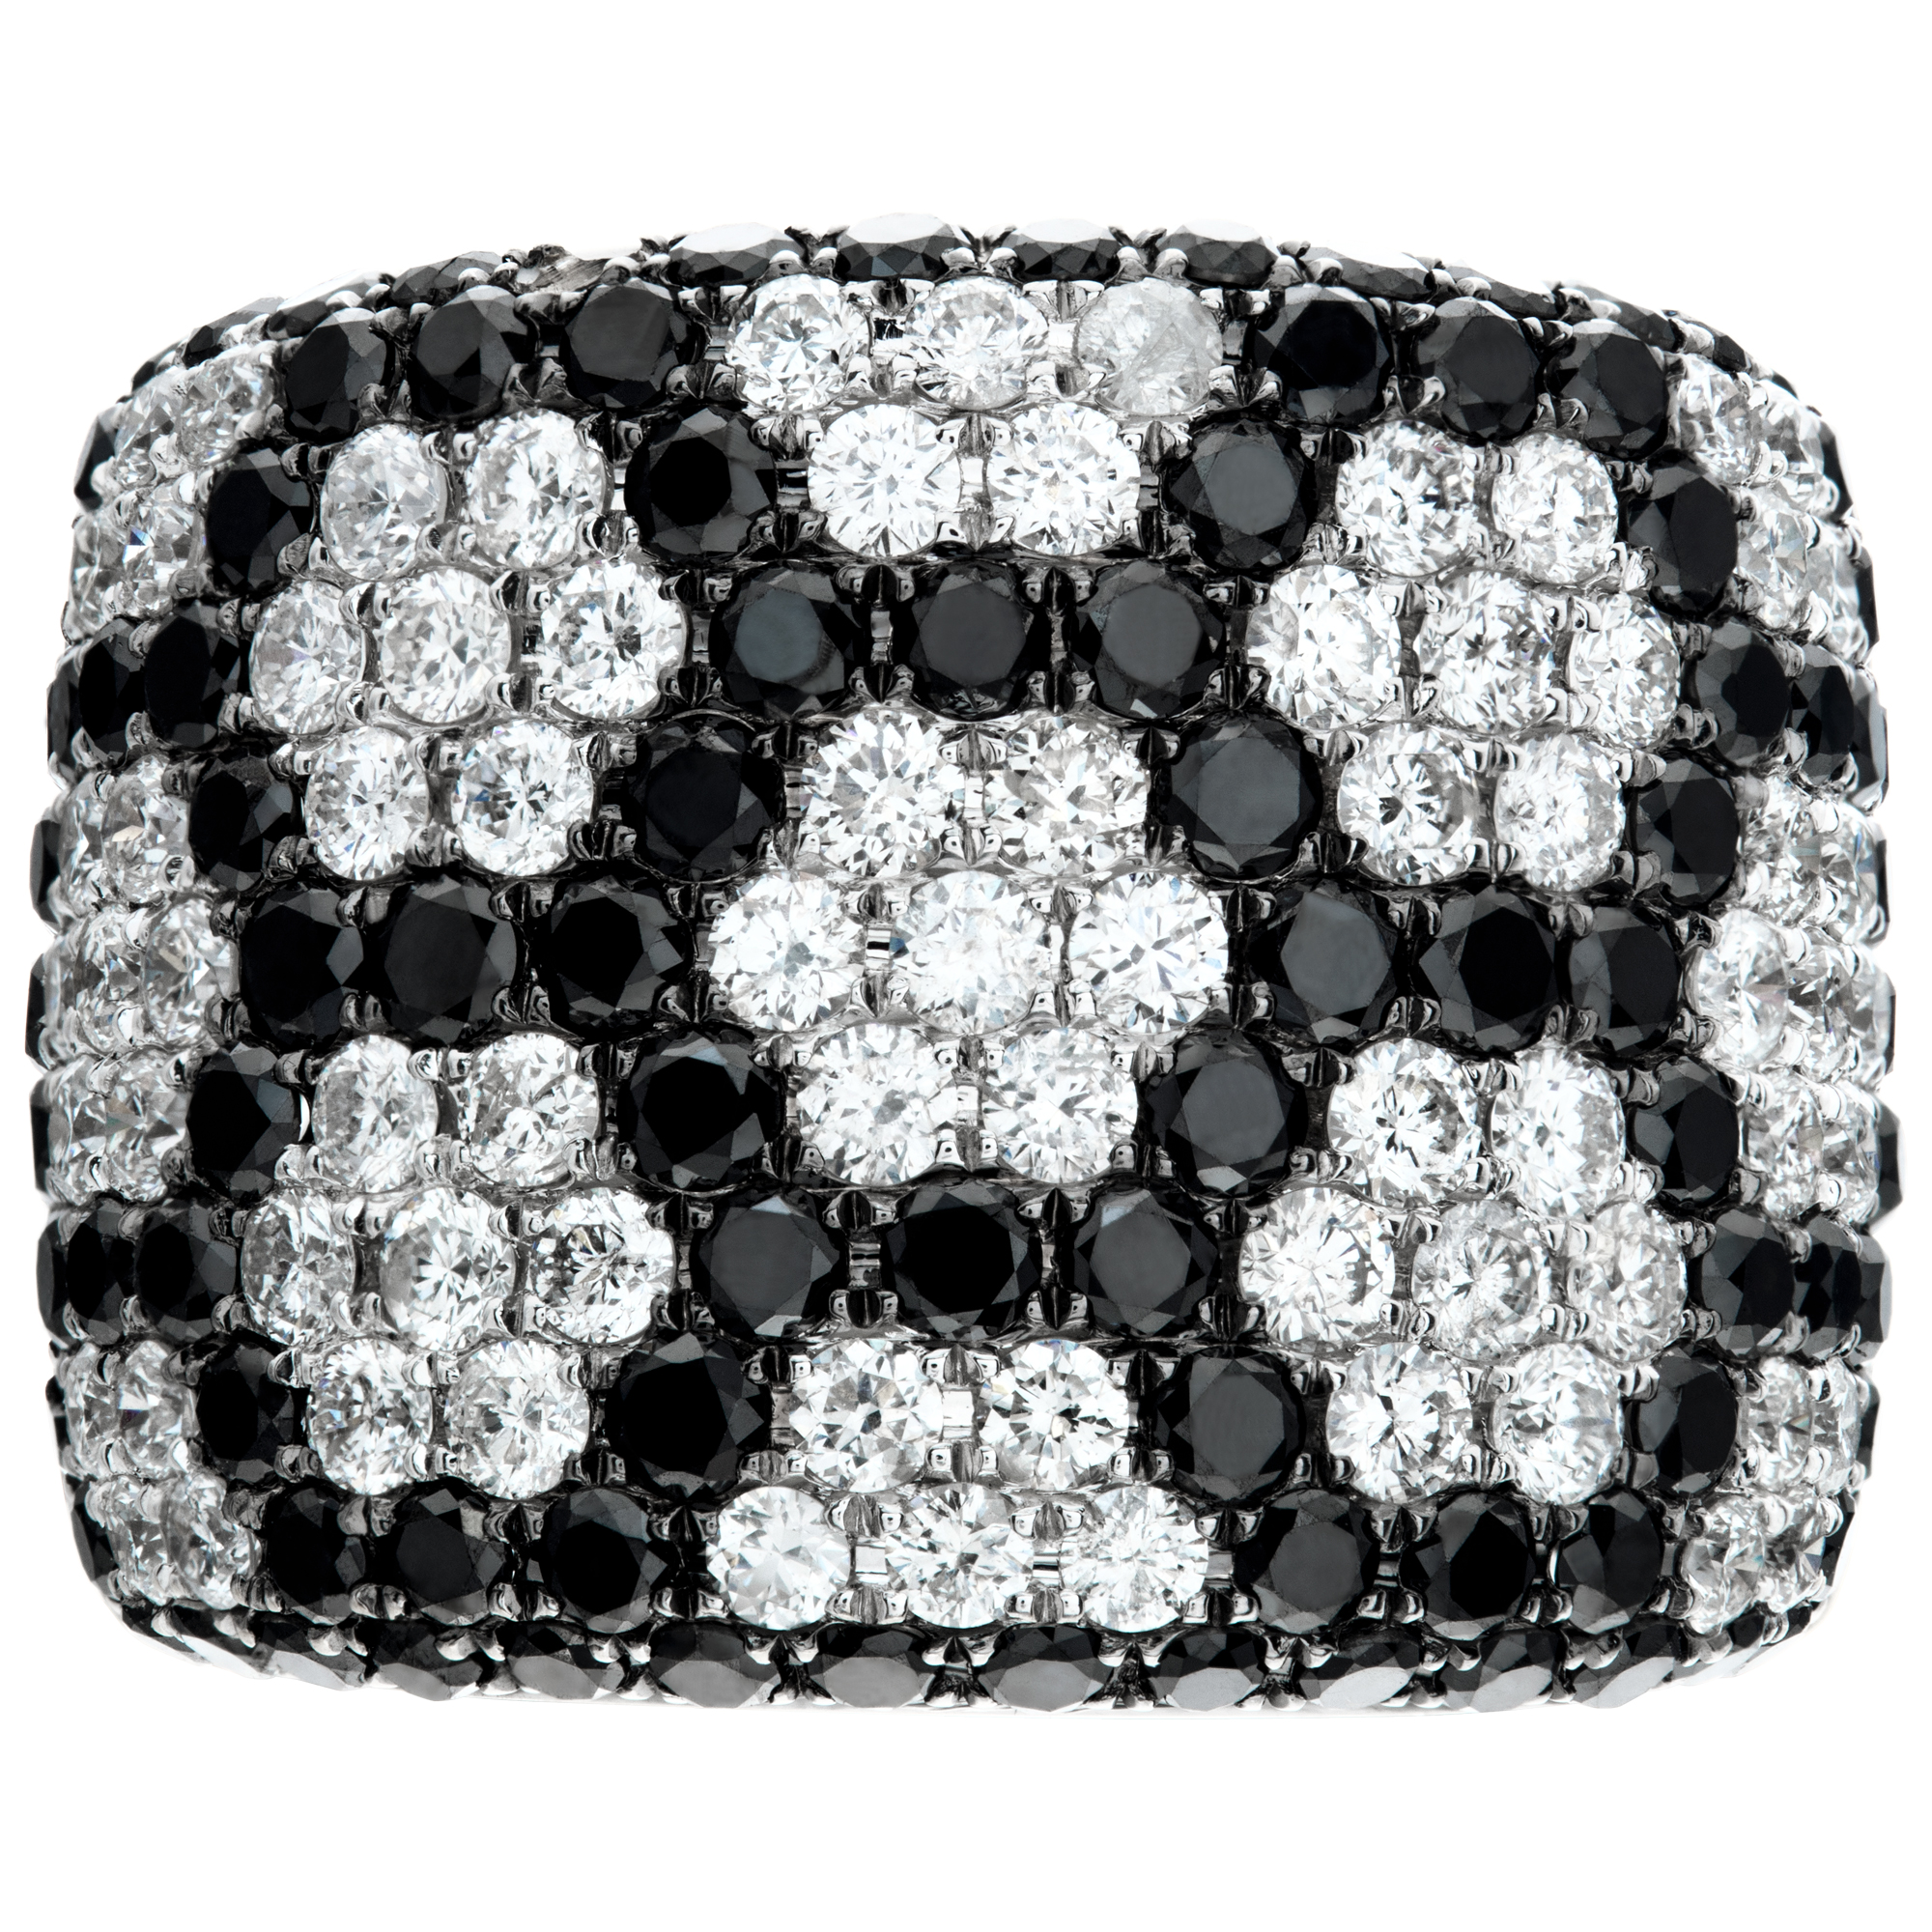 White & black diamonds ring set in 18K white gold. Total diamonds approx weight 3.00 carats Size 5. image 2